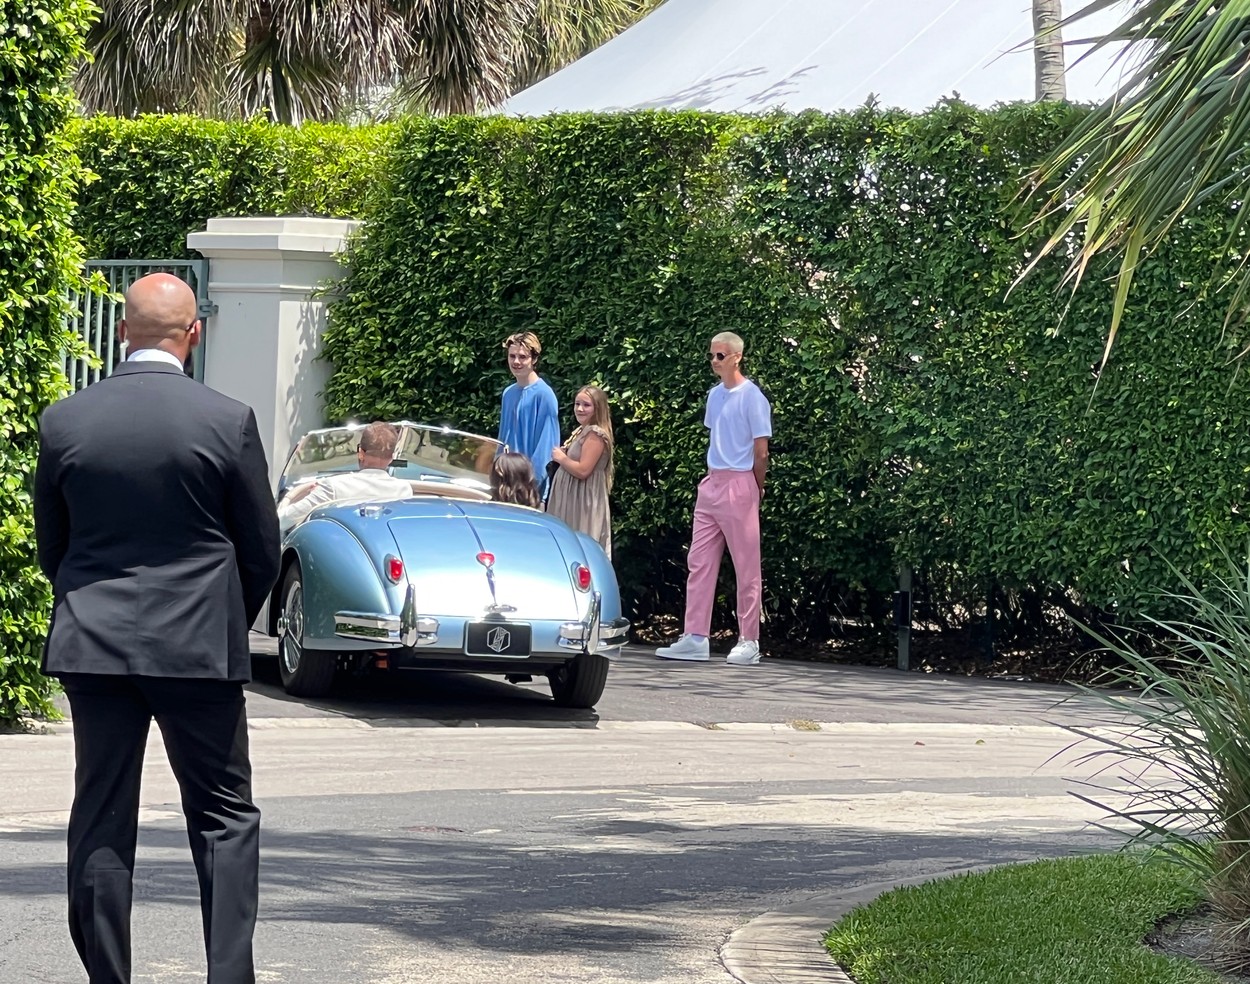 EXCLUSIVE: A very posh arrival! David and Victoria Beckham arrive for Sunday bunch in a classic car the morning after Brooklyn's wedding. 
The proud parents were greeted by Romeo , Cruz and Harper as they swept into to the Peltz familys stunning Florida pad in the fancy baby blue vehicle for day three of the star-studded wedding extravaganza.
The lavish brunch was being held at a huge marquee set up in sprawling tropical gardens out back of the residence, which was also the romantic setting for Friday eveningâ€™s rehearsal dinner. 
David and Victoriaâ€™s eldest son and actress Nicola tied the knot at her ultra wealthy familyâ€™s USD 76 million oceanfront estate.

Pictured: david beckham,victoria beckham,romeo,cruz,harper,Image: 681767091, License: Rights-managed, Restrictions: , Model Release: no, Pictured: david beckham,victoria beckham,romeo,cruz,harper, Credit line: Profimedia